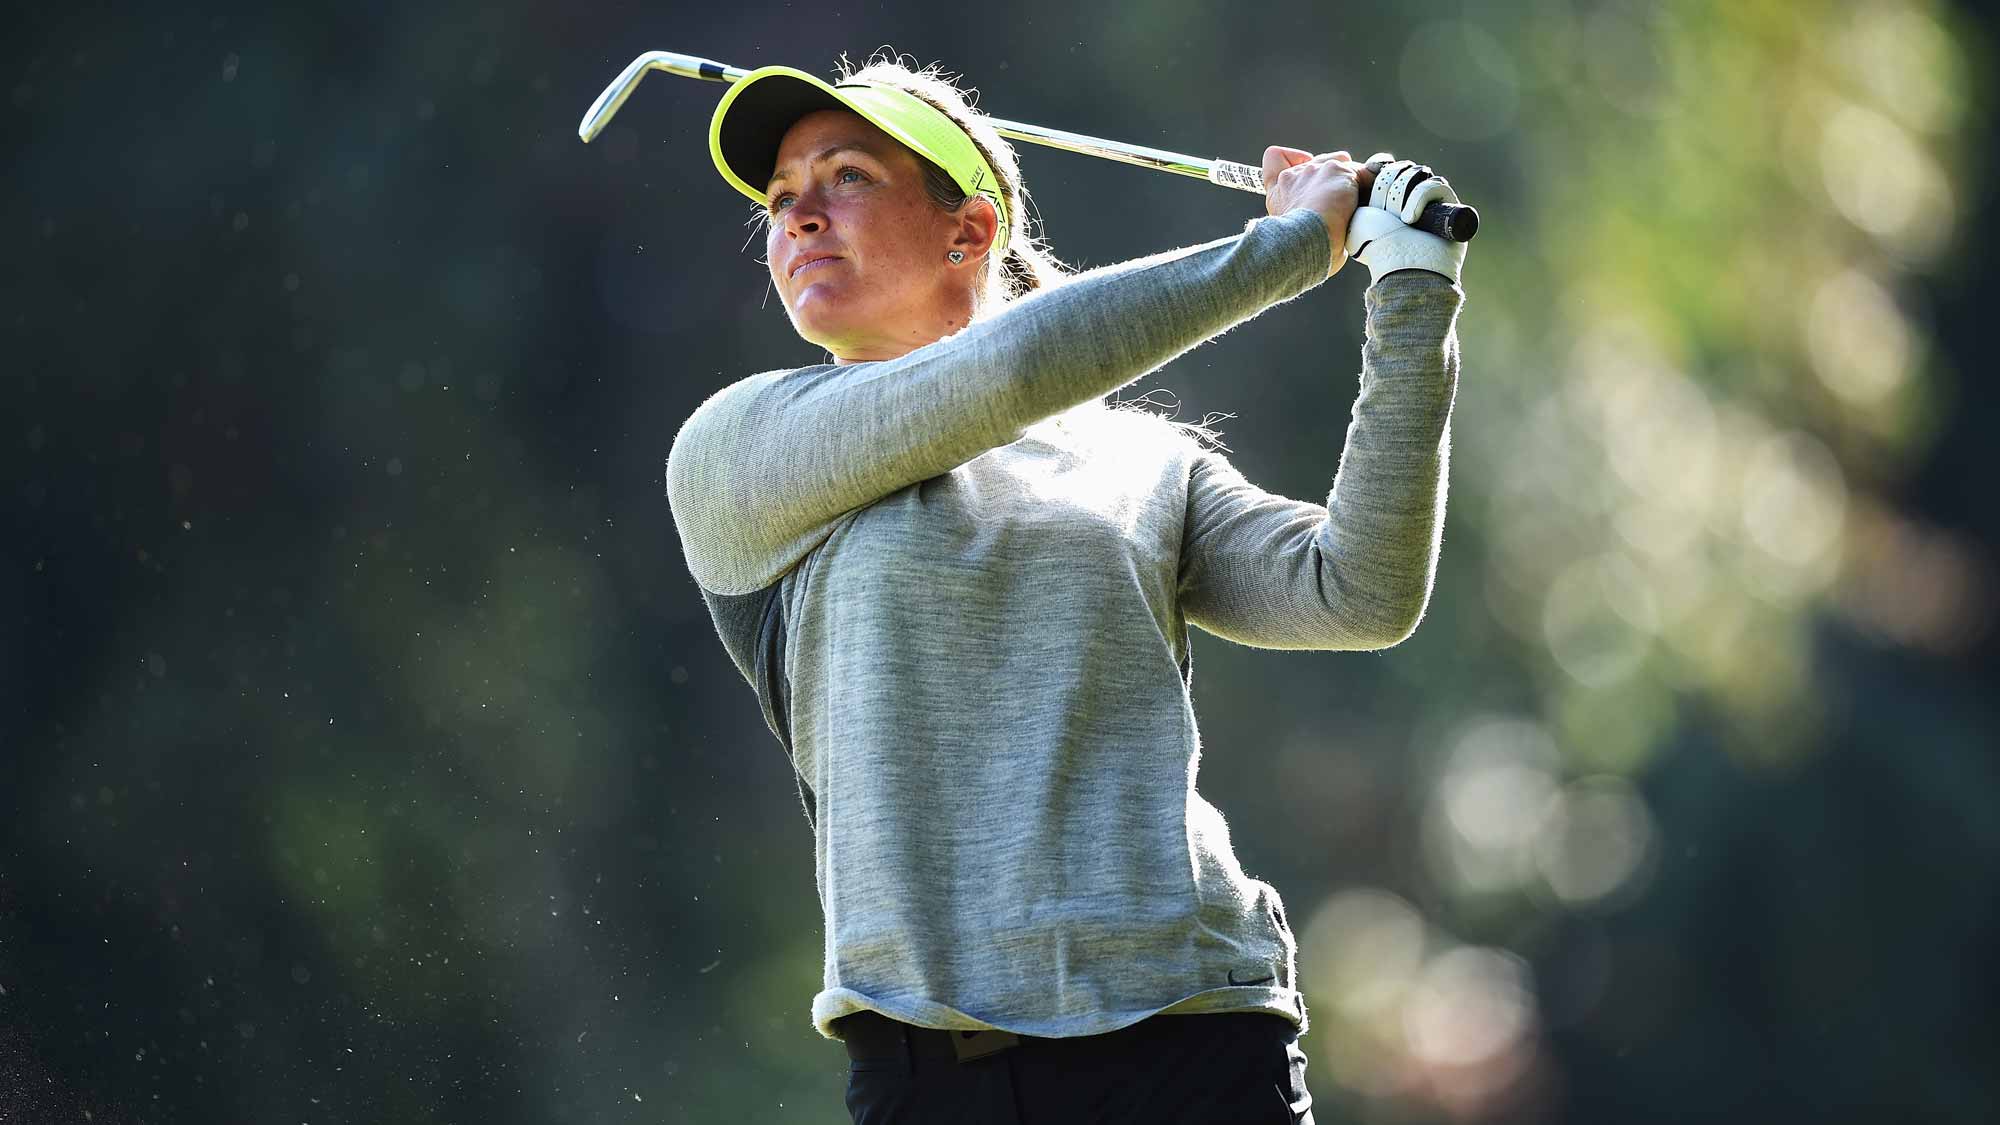 Suzann Pettersen during the first round of the Evian Championship